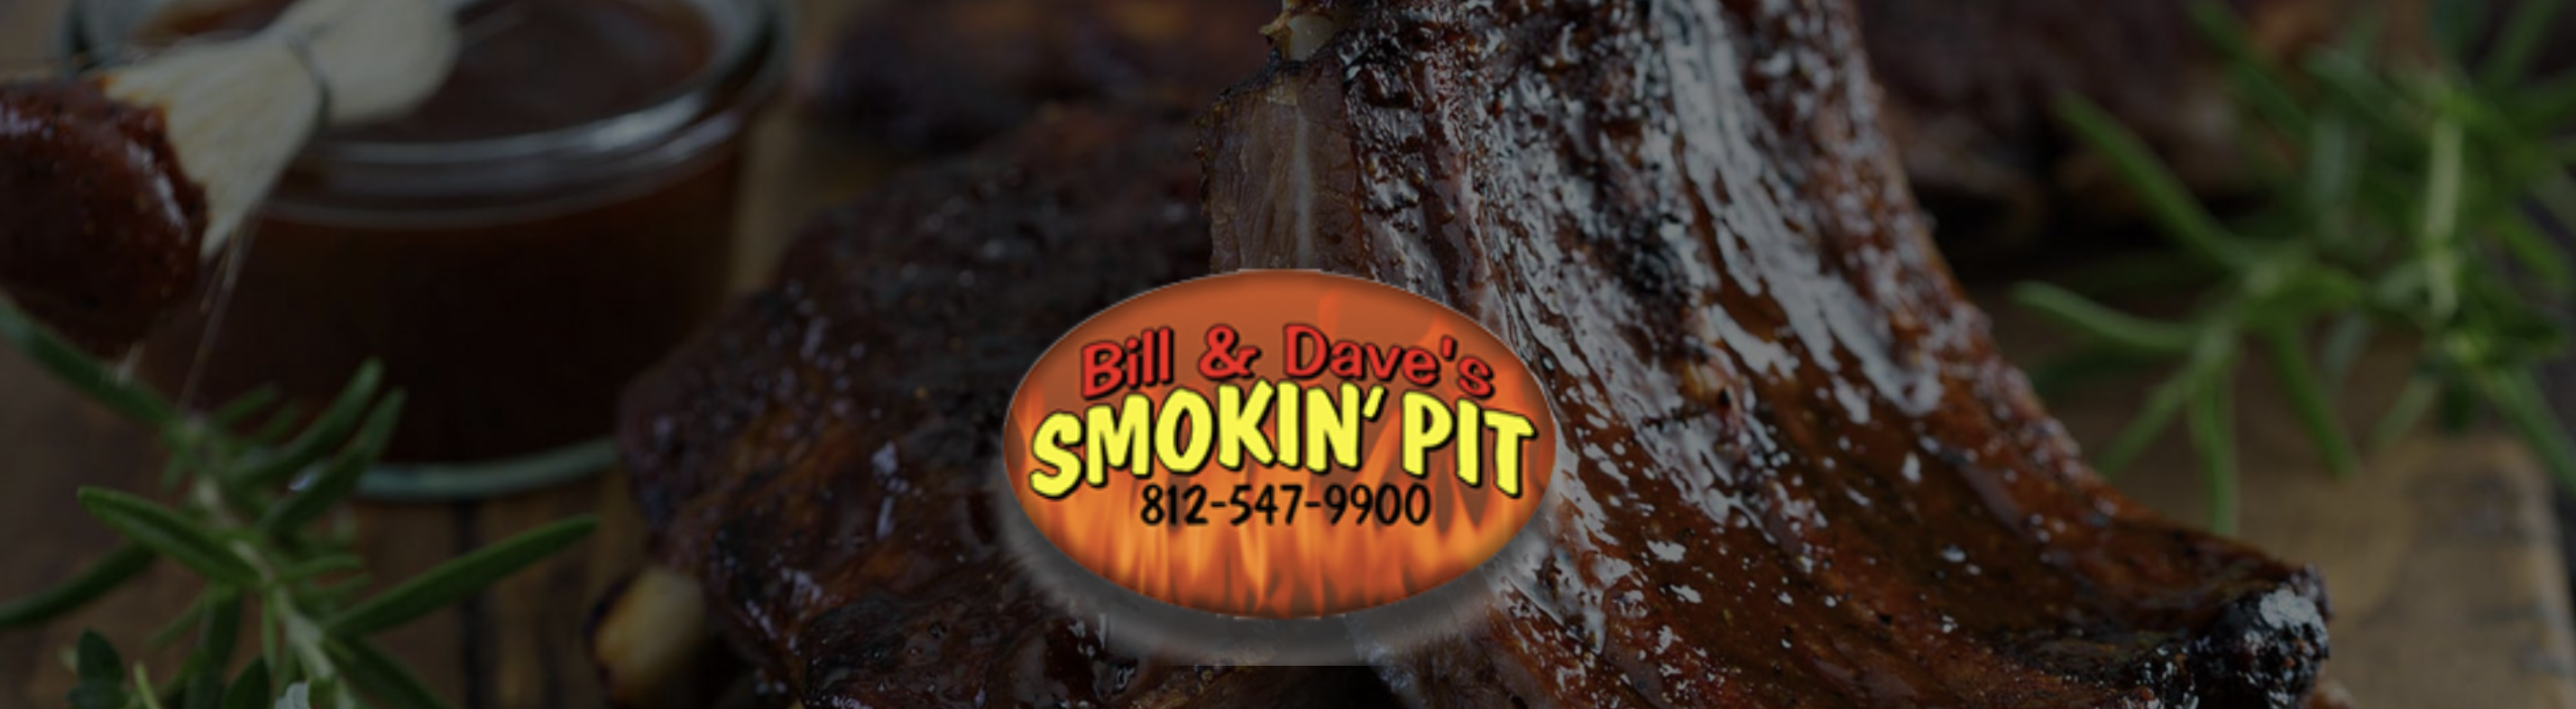 Bill and Dave’s Smokin’ Pit